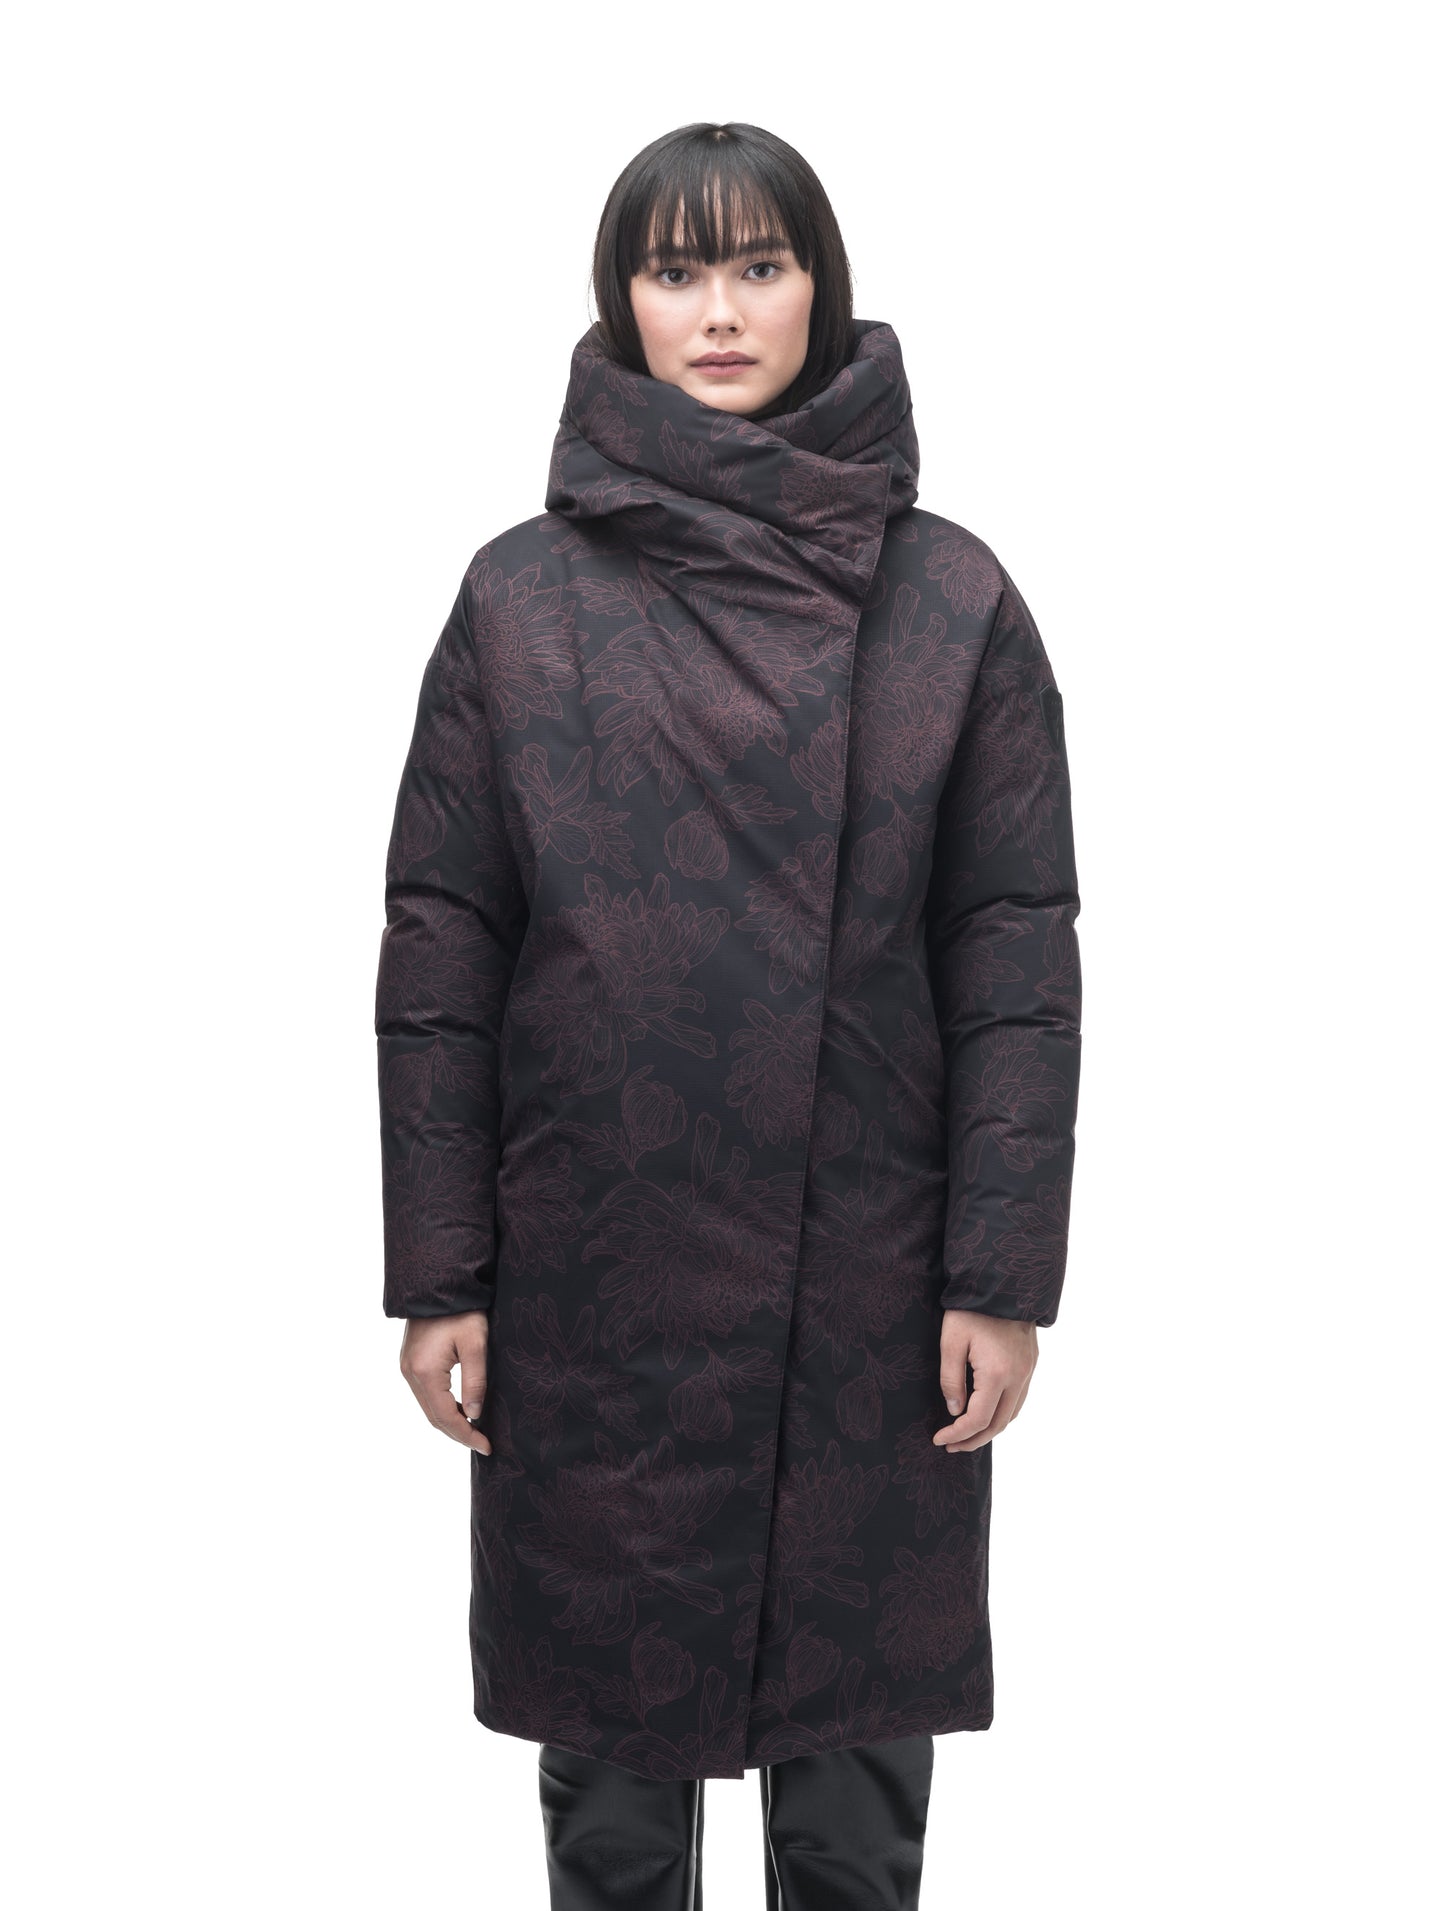 Axis Ladies Oversized Coat in knee length, Canadian duck down insulation, and two-way front zipper, in Dark Floral